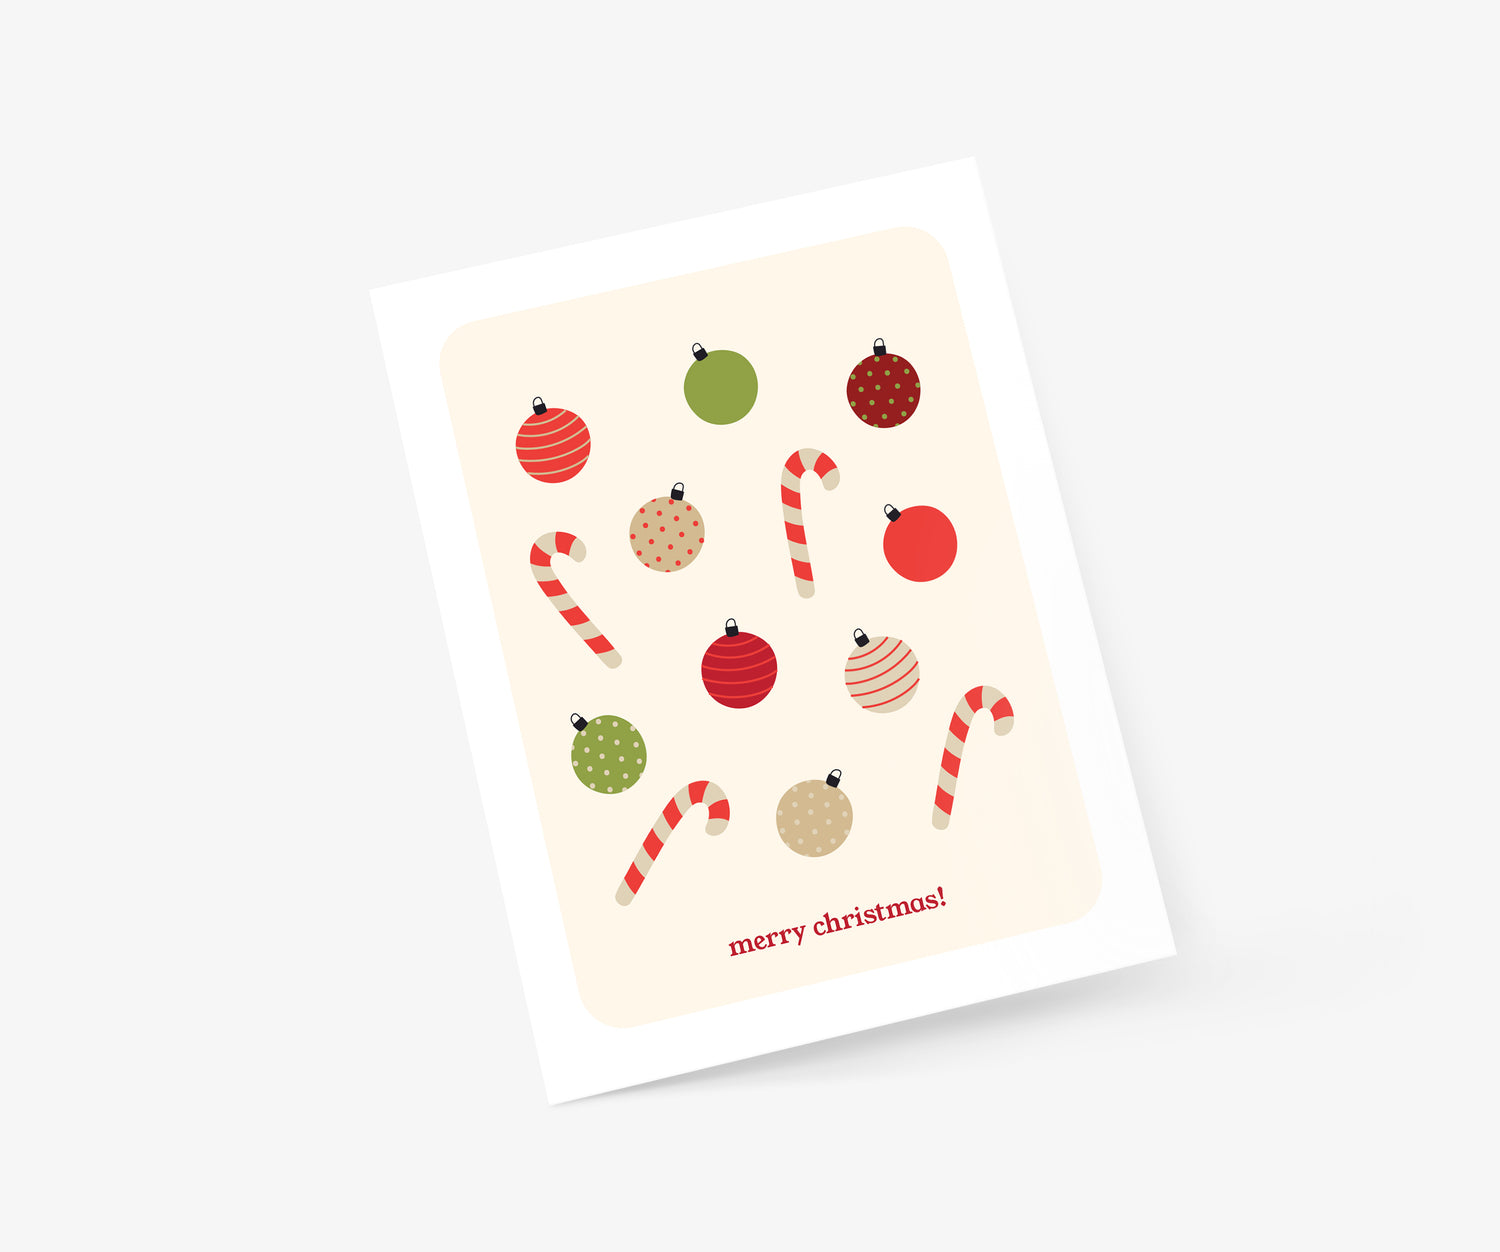 Merry Christmas Ornaments and Candy Cane Christmas Card | Footnotes Paper